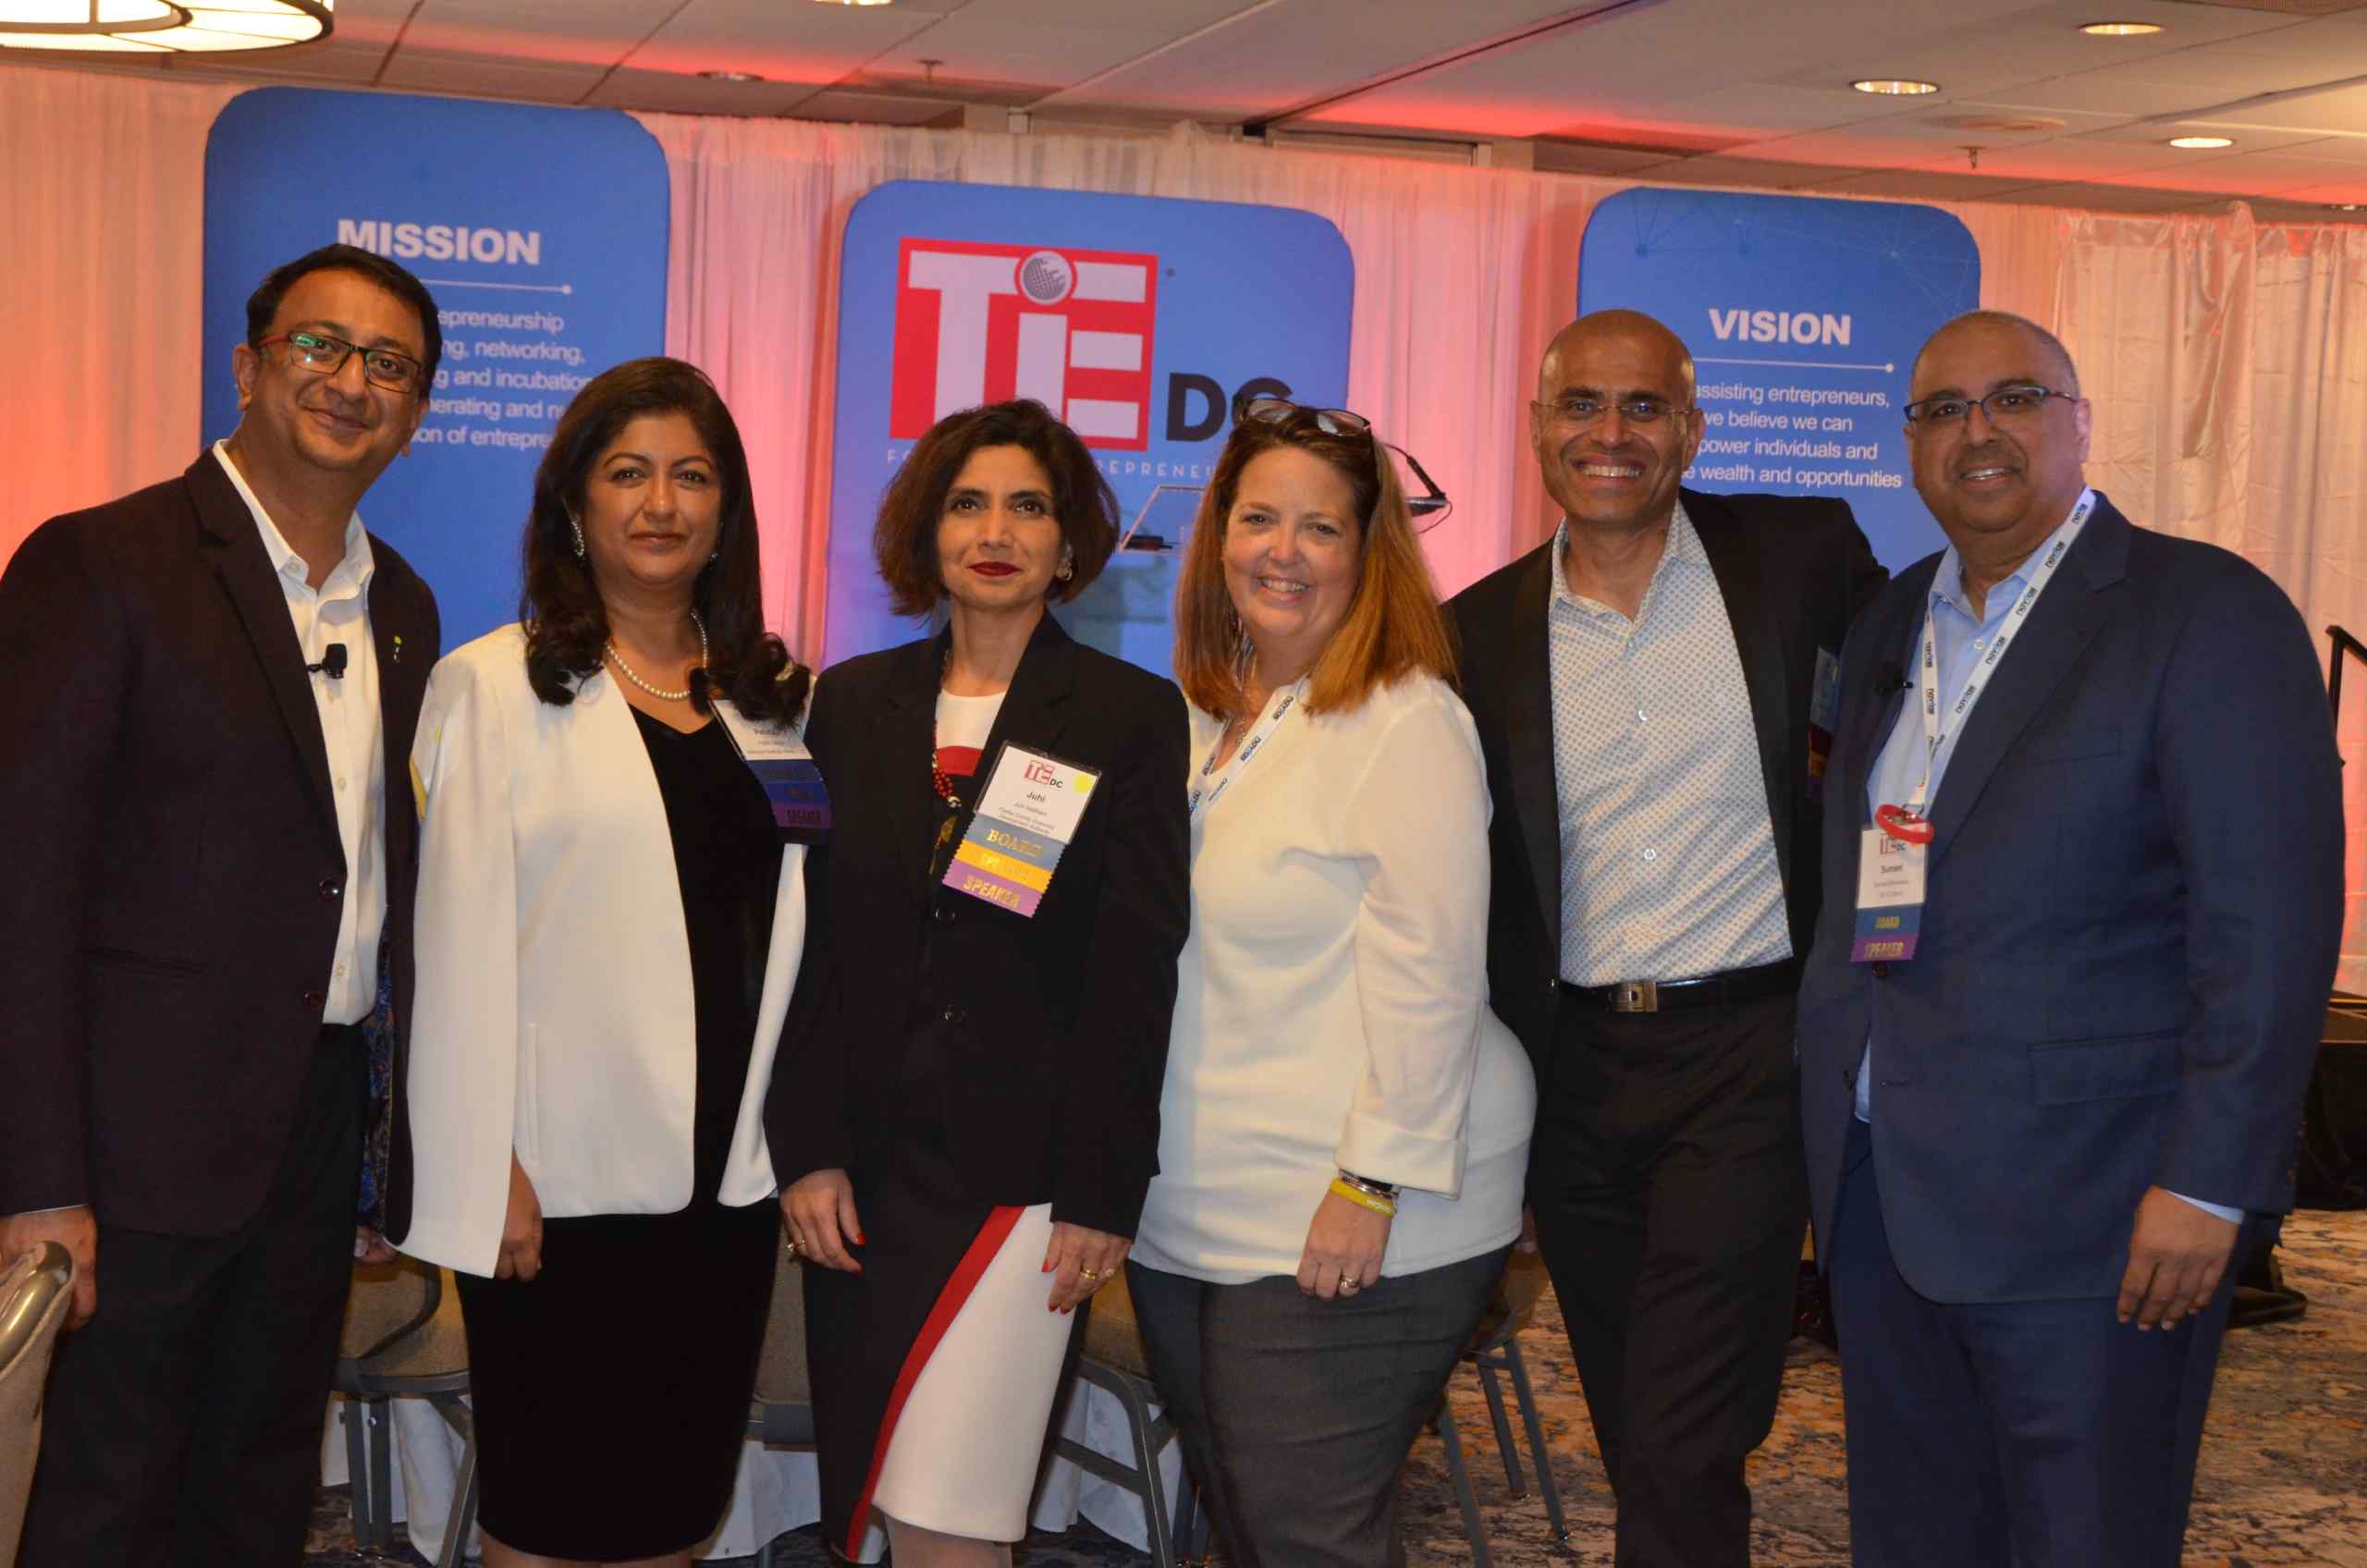 Members of TiE DC at an event, with their mission and vision displayed at the background.